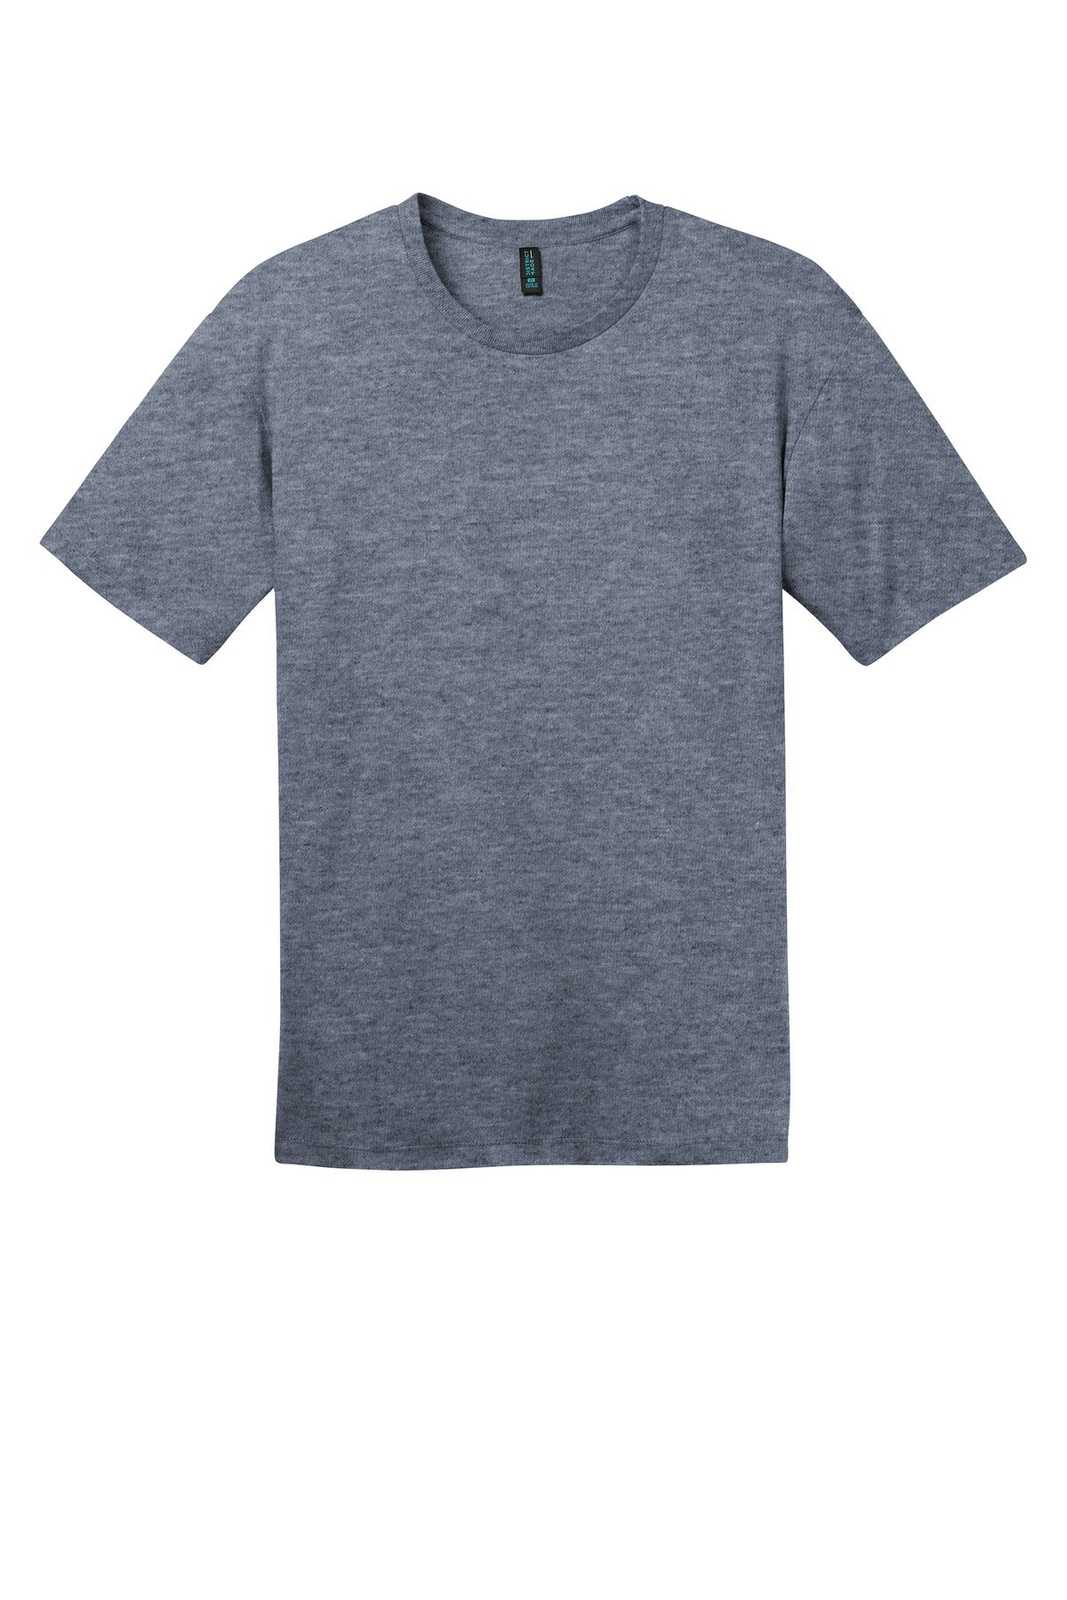 District DT104 Perfect Weight Tee - Heathered Navy - HIT a Double - 5